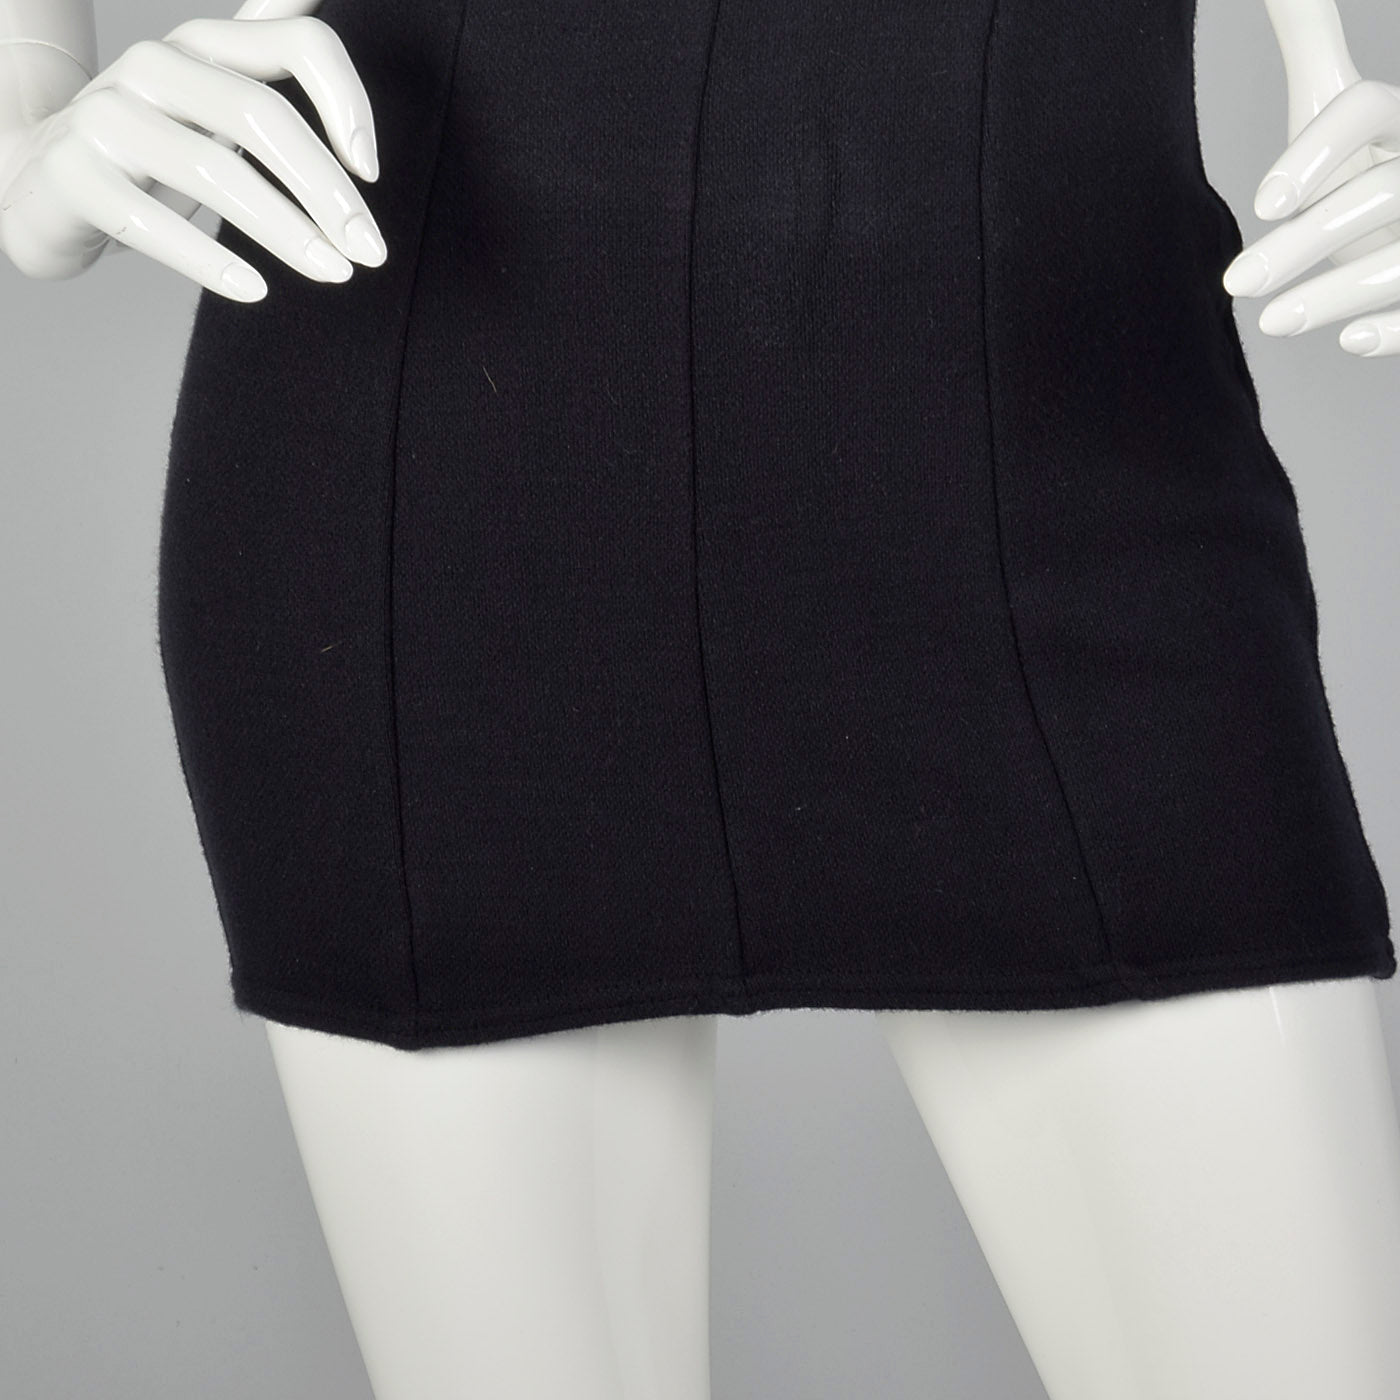 1960s Black Knit Swimsuit with White Trim